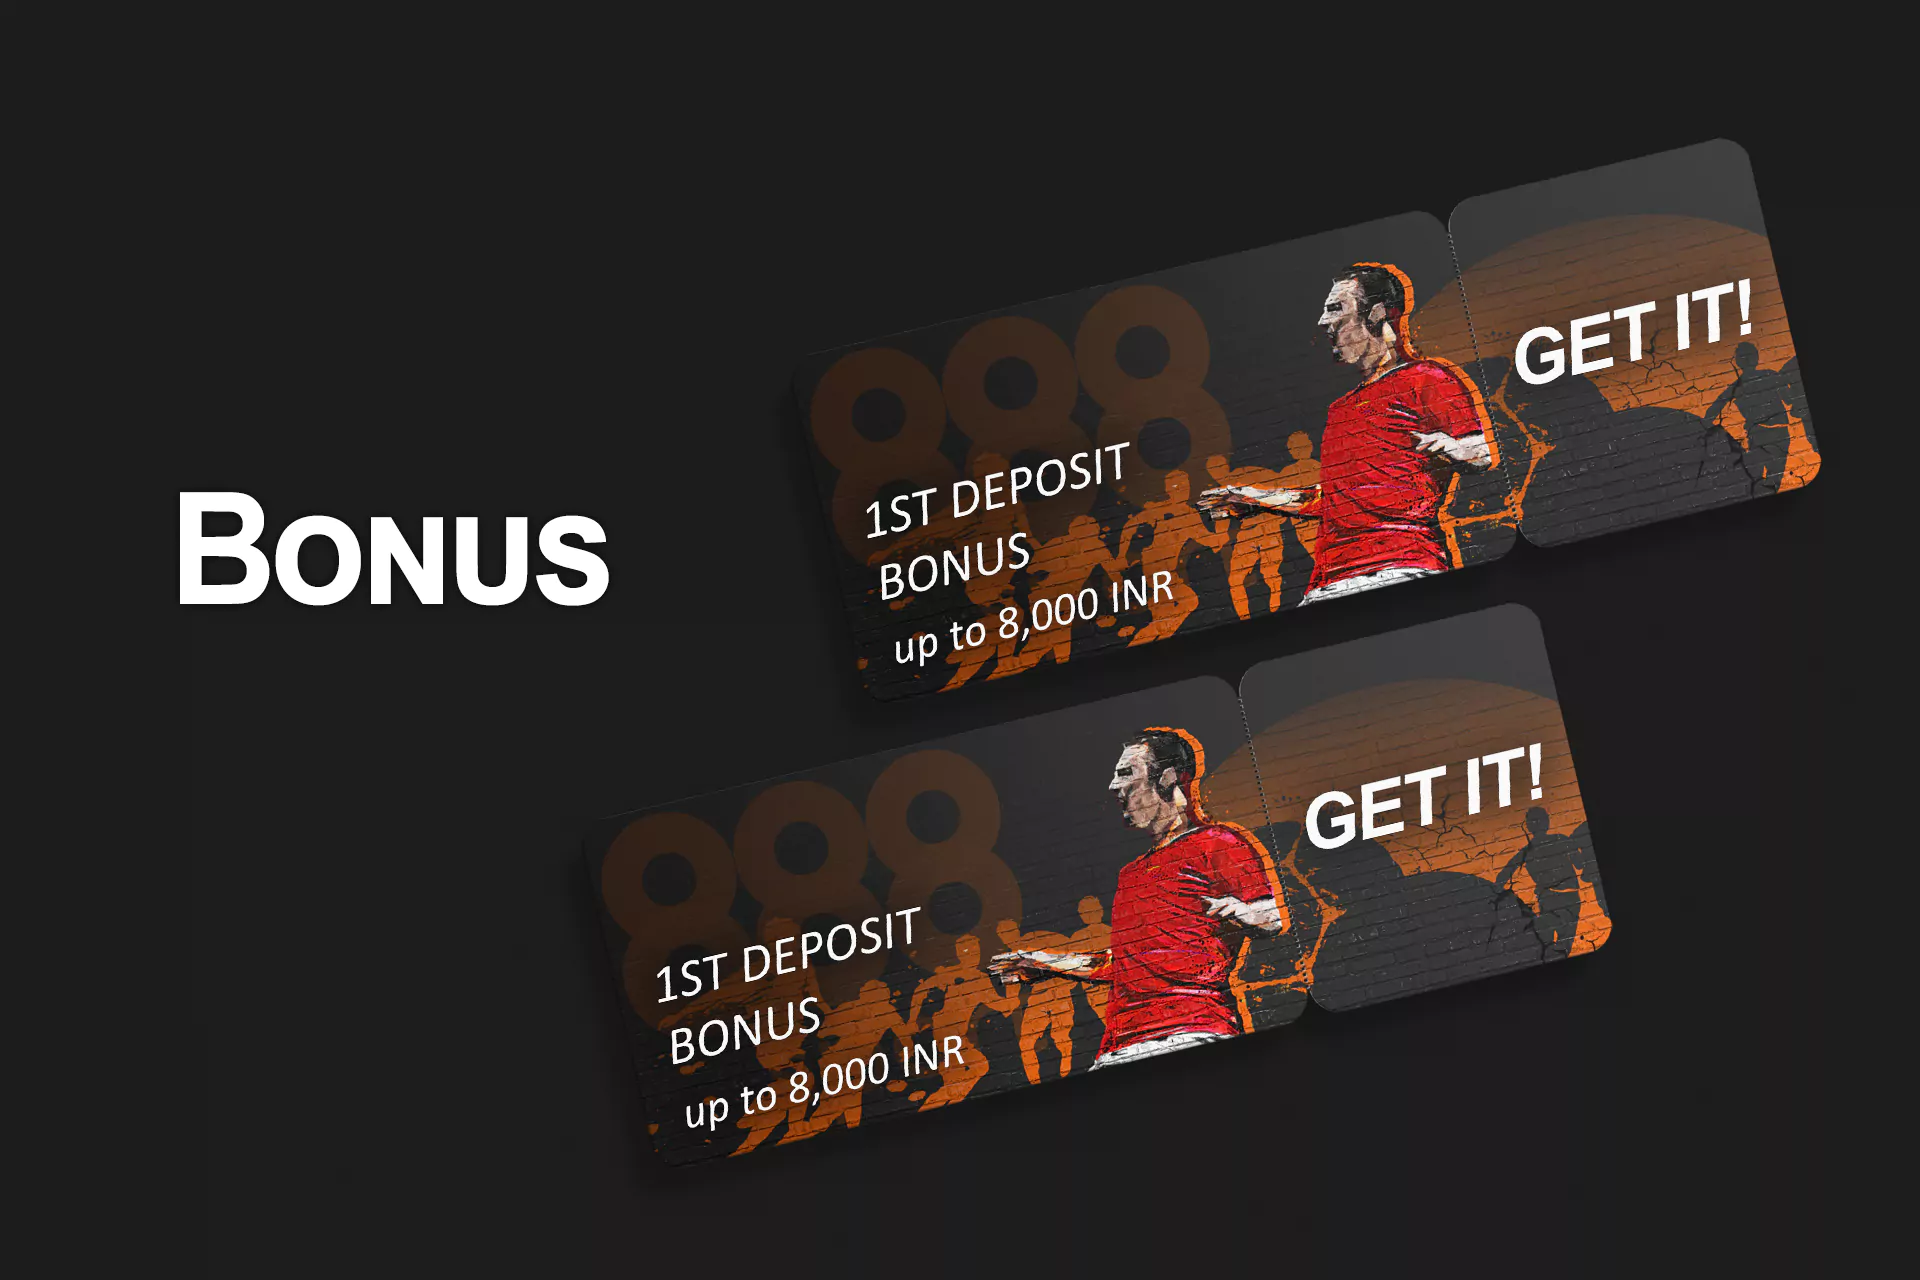 After you register at 888sport, you can claim the first deposit bonus as a welcome offer from the bookmaker.